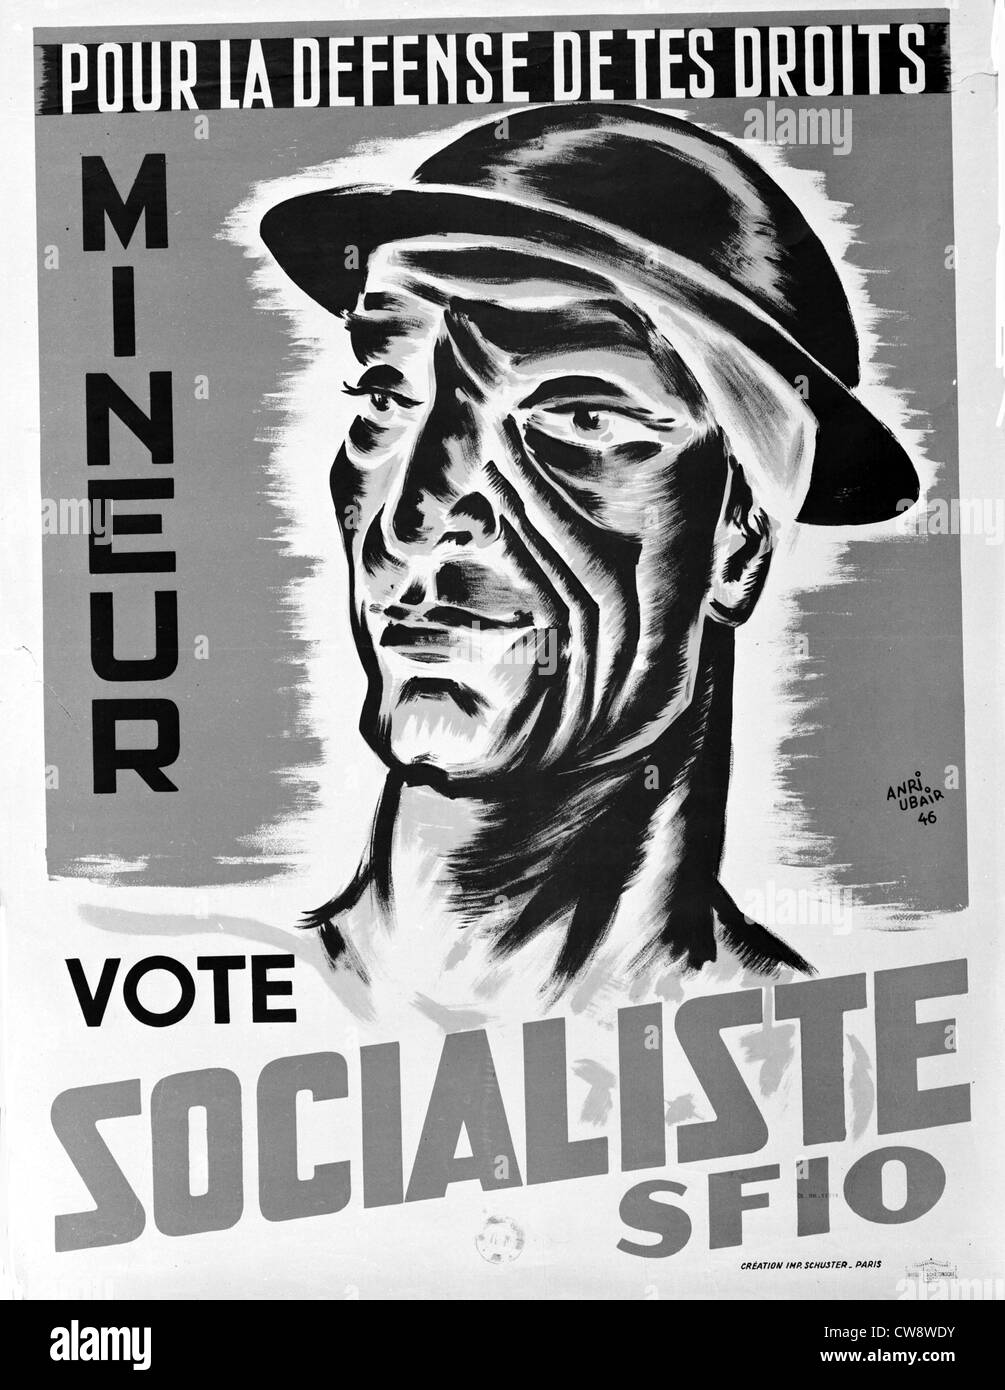 Poster of the S.F.I.O. Socialist Party Stock Photo